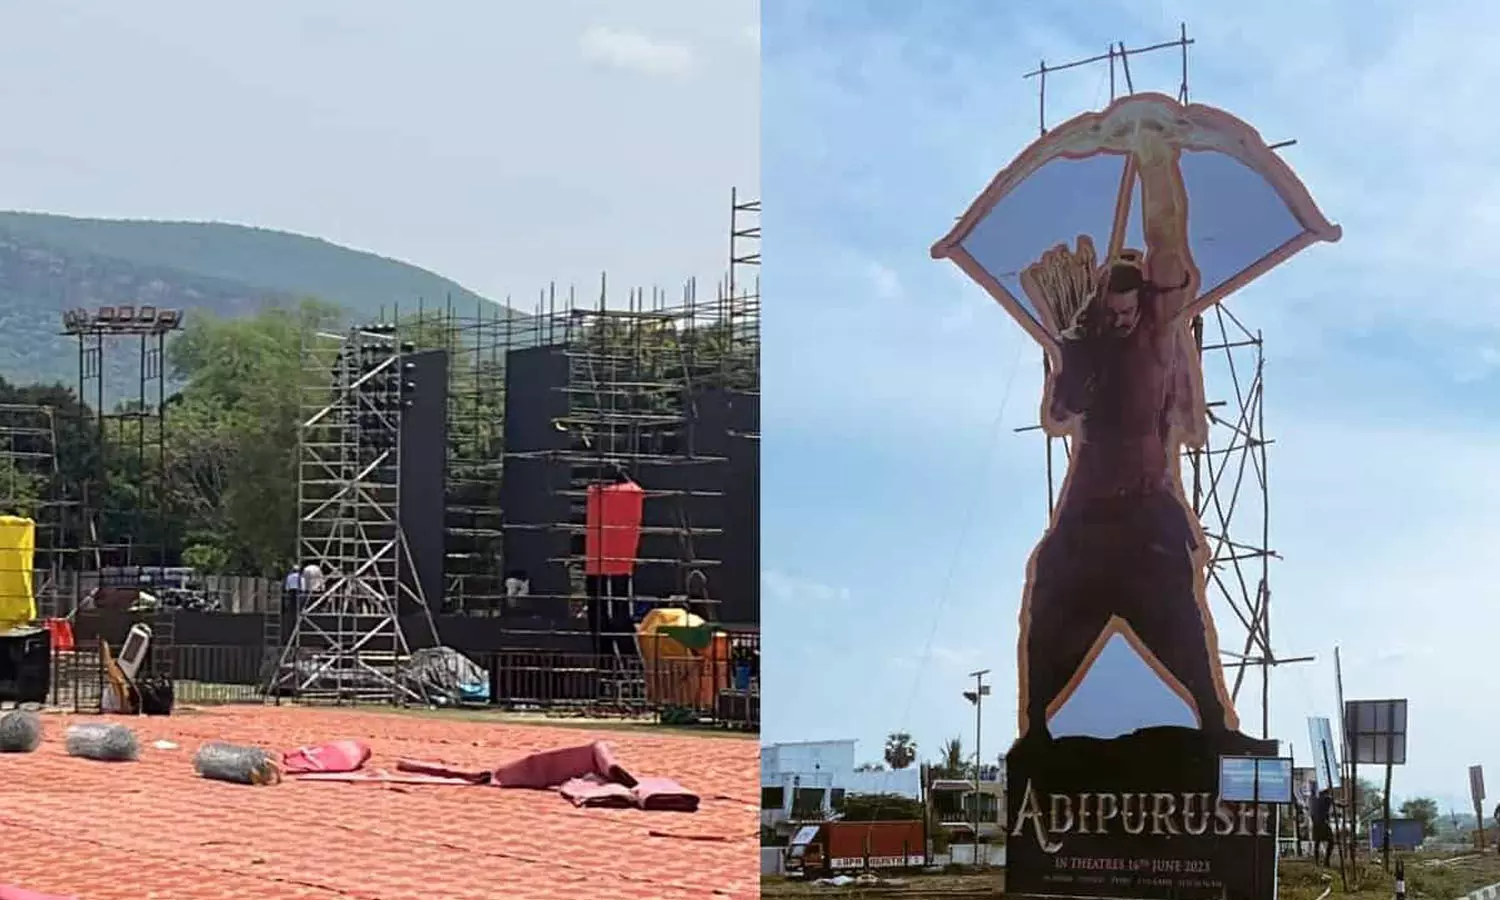 Big Day for Prabhas fans; Adipurush pre-release event today